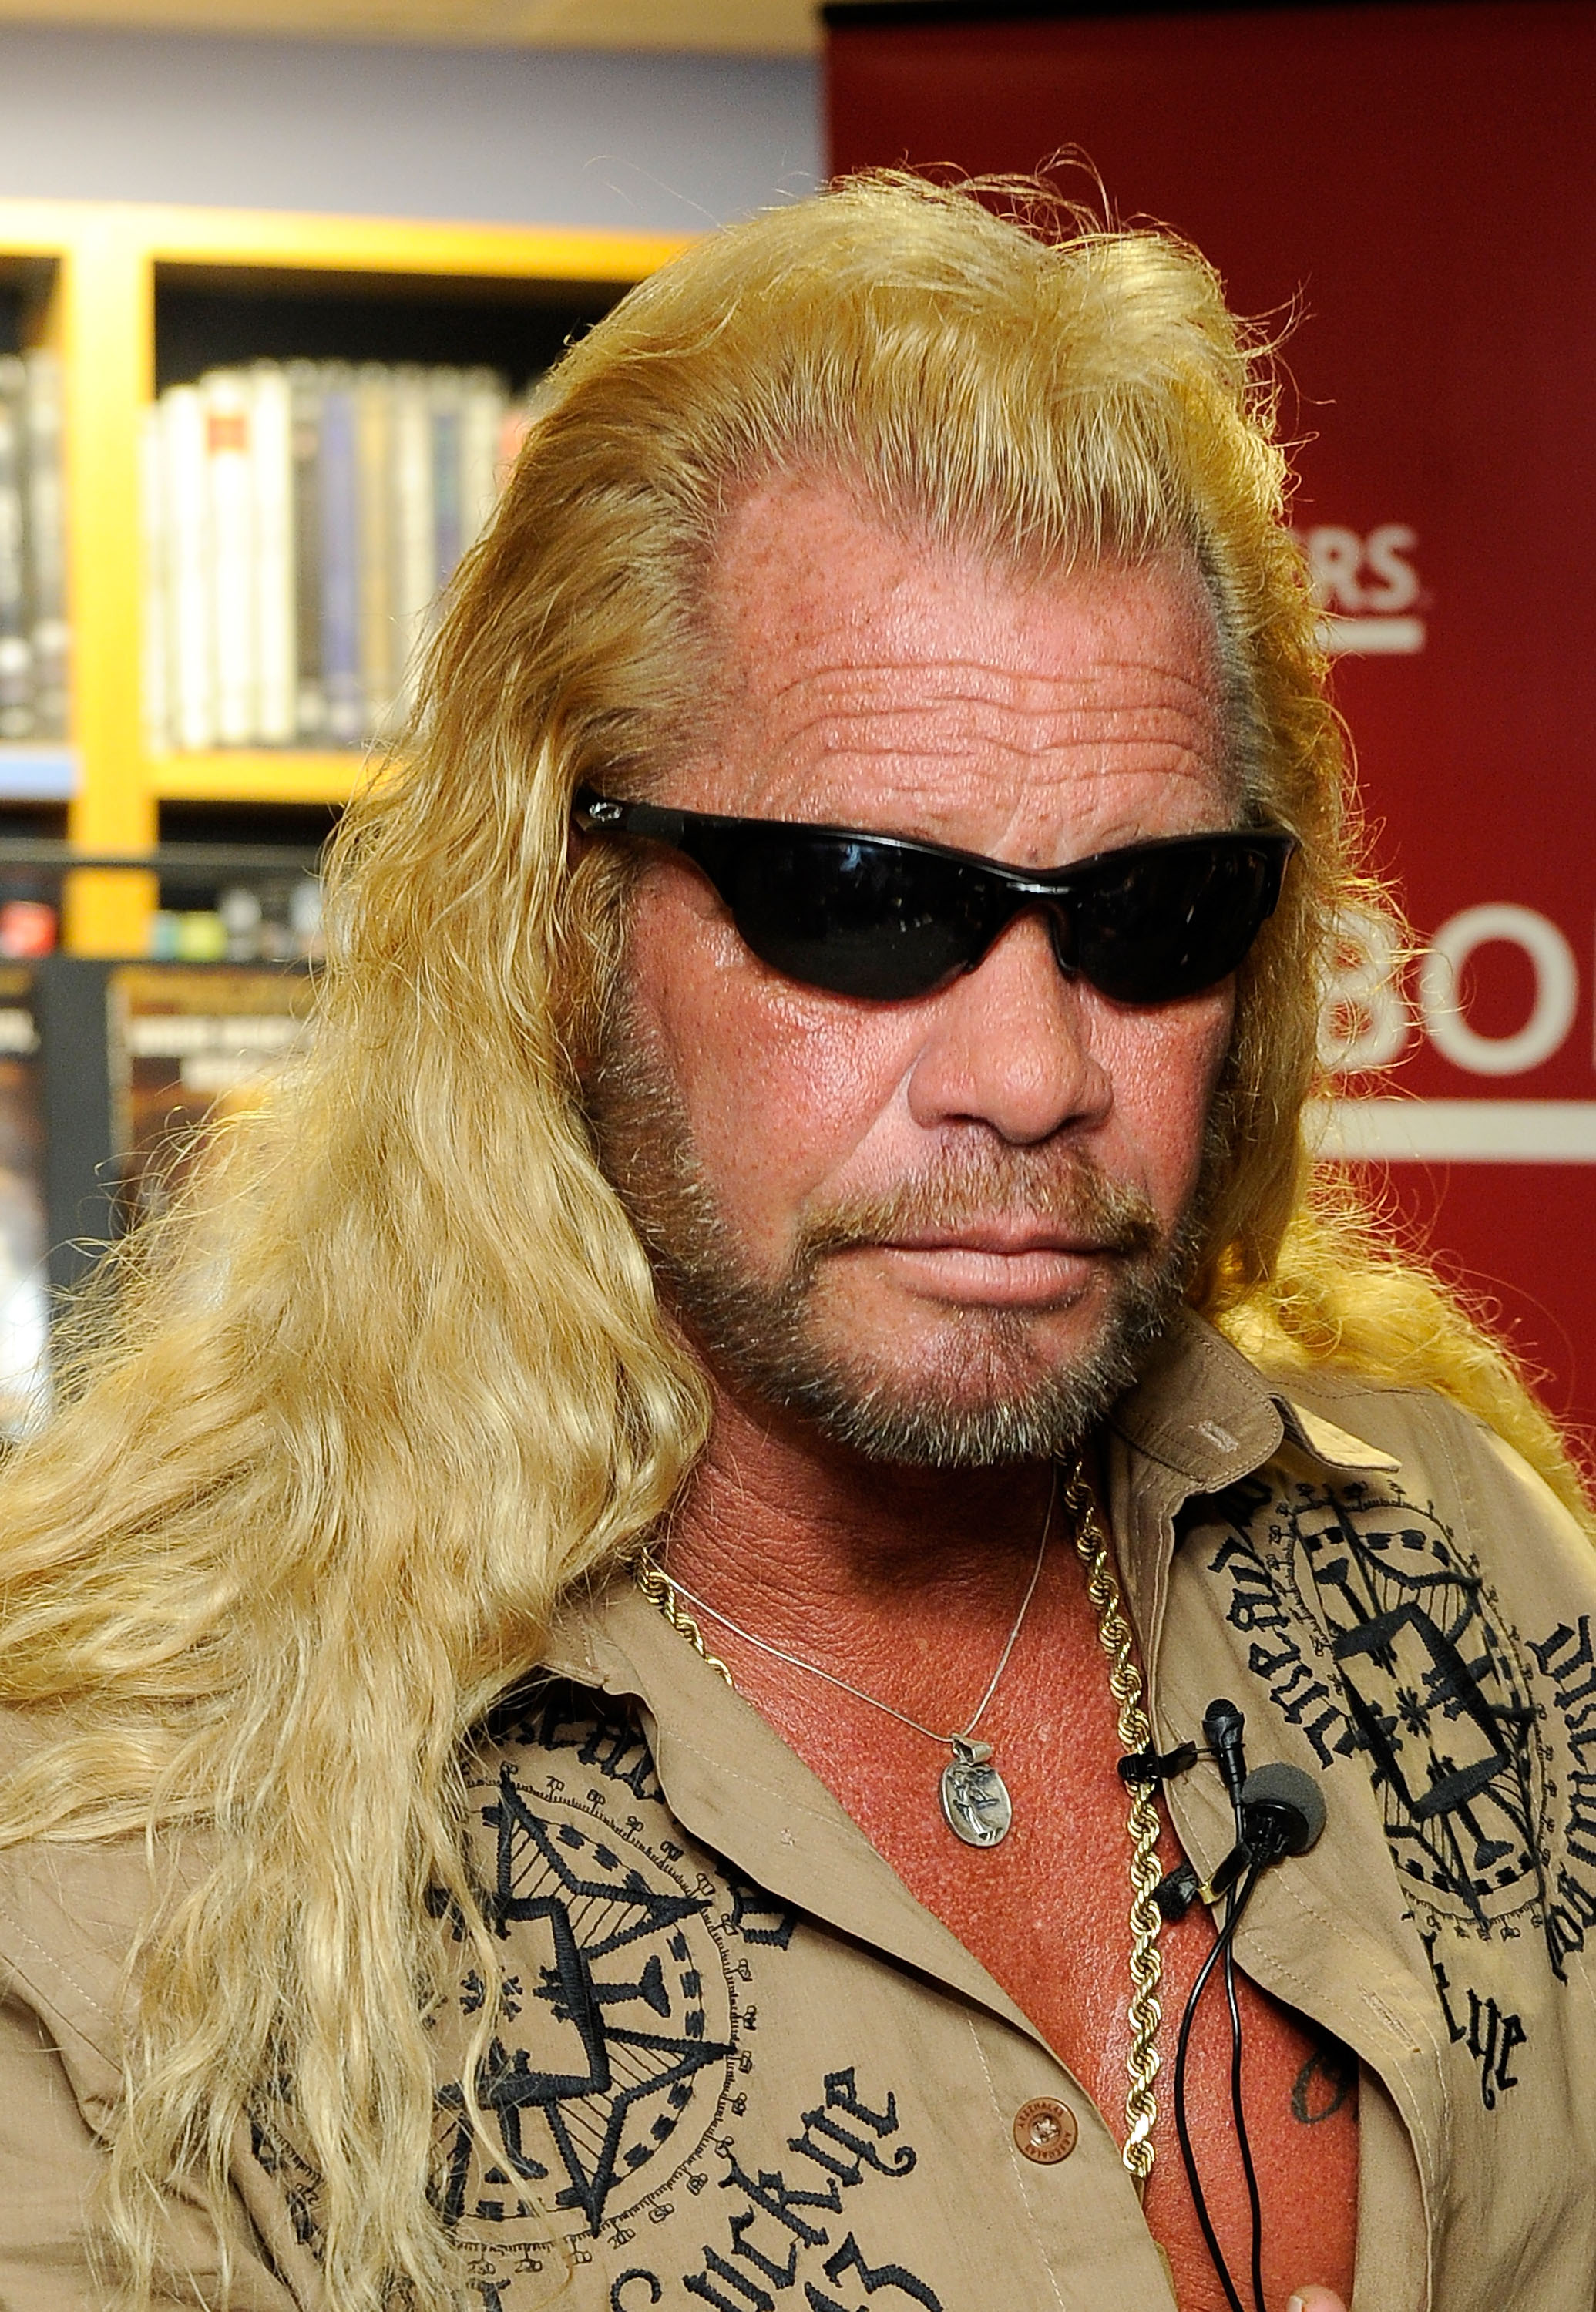 Duane Chapman promotes his book "When Mercy Is Shown, Mercy Is Given" at Borders Wall Street on March 19, 2010, in New York City. | Source: Getty Images